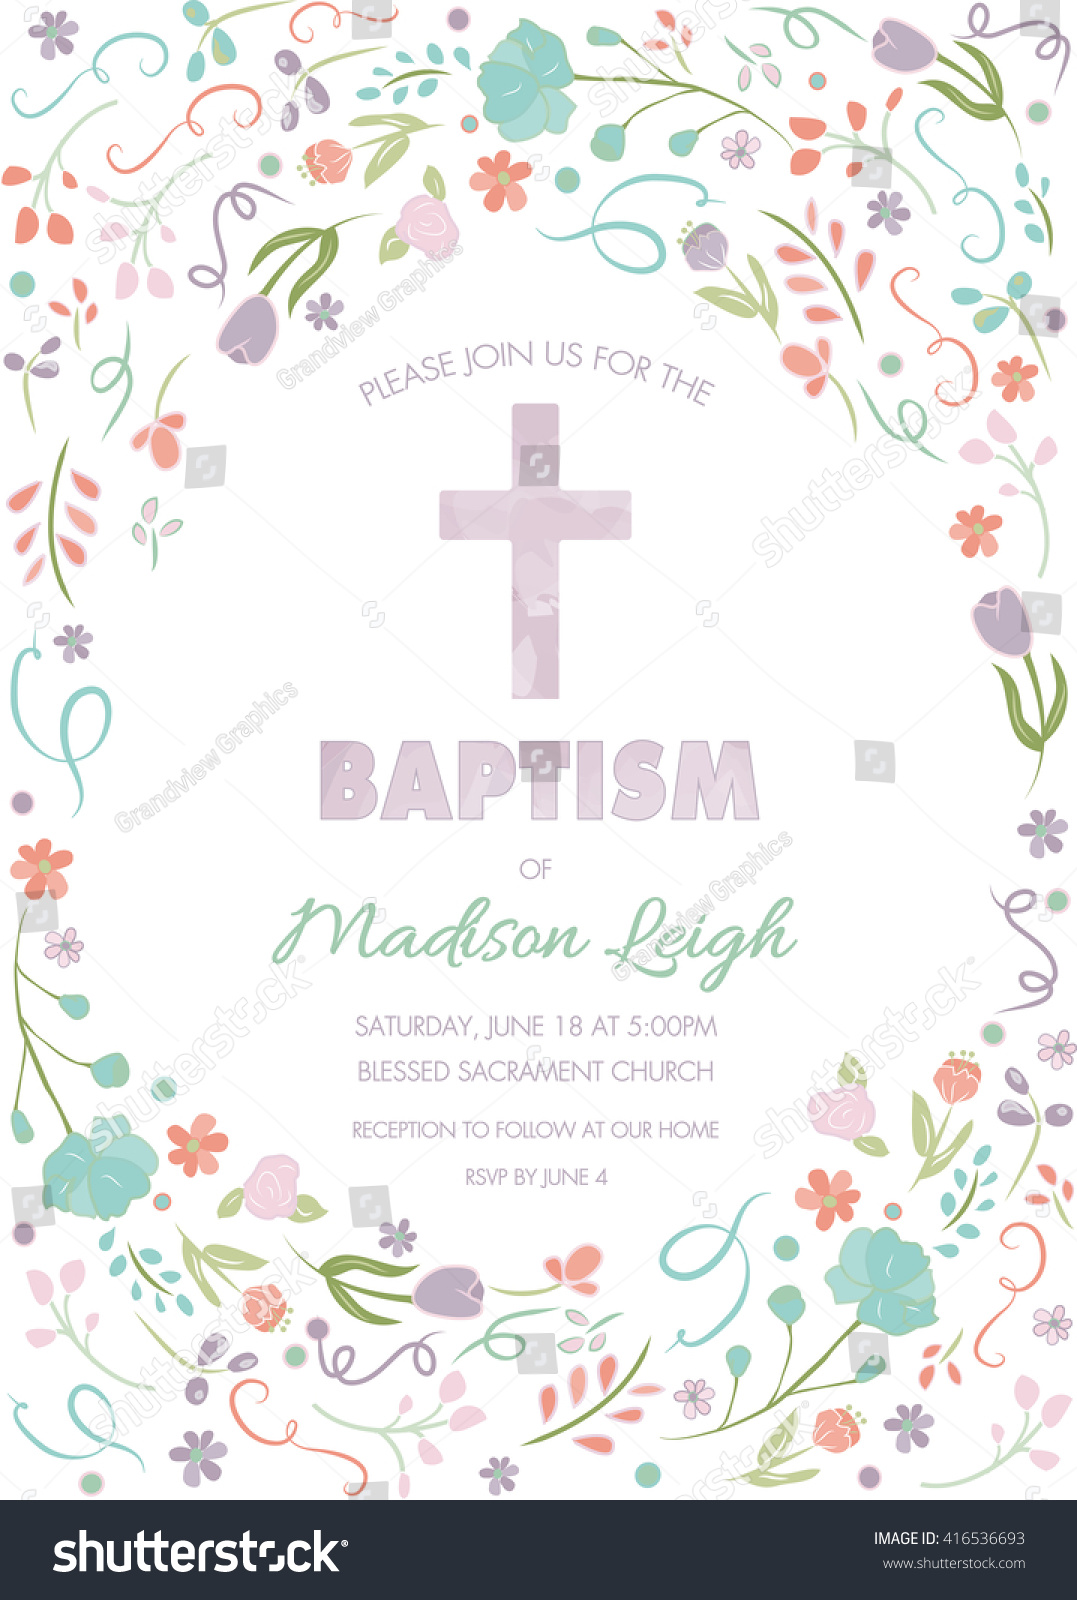 SVG of Baptism, Christening, First Communion Invite Template - Invitation with Floral Border Frame svg